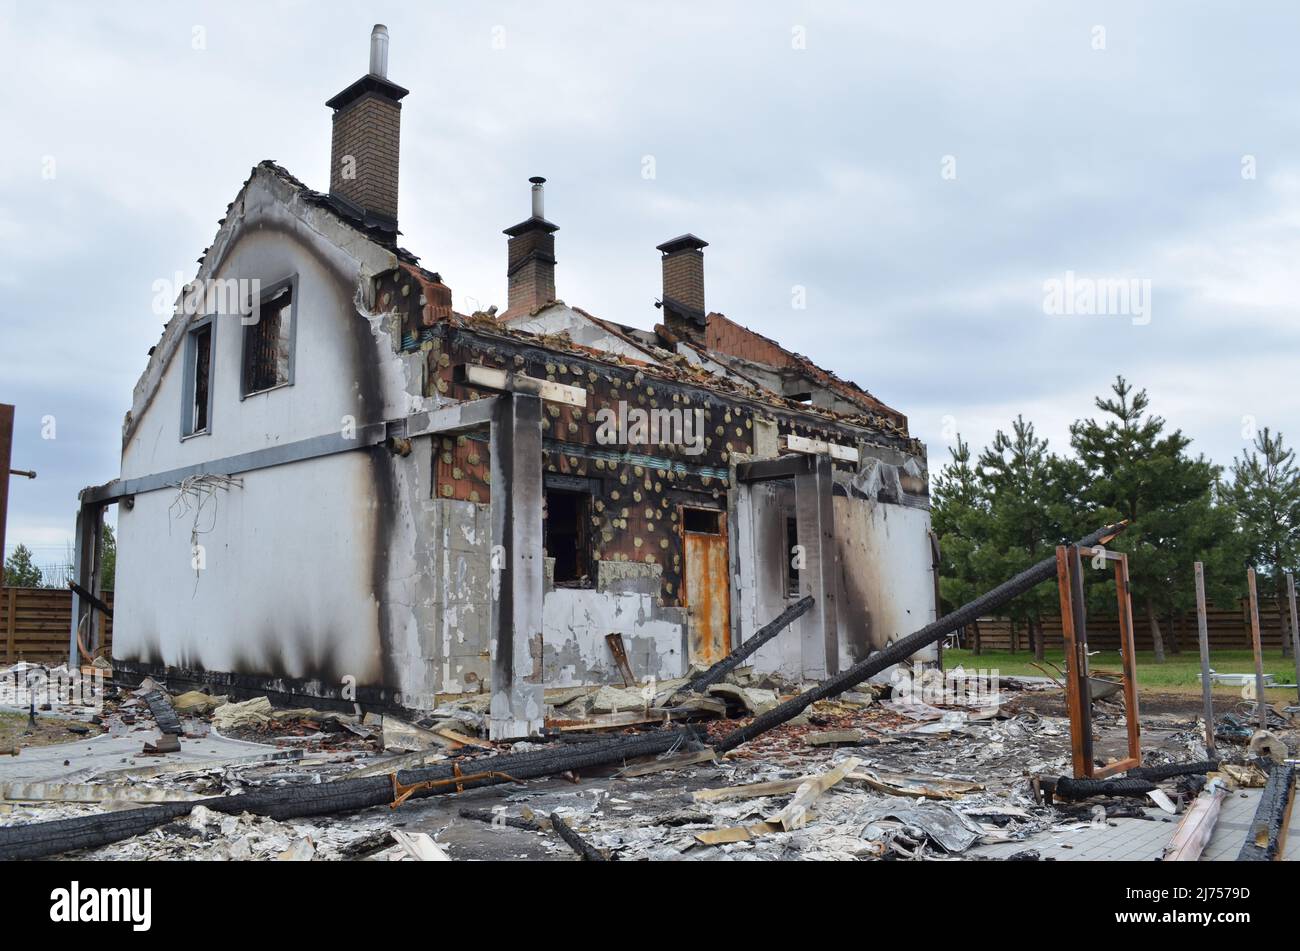 Dmytrivka village, Kyiv region, Ukraine - April 06, 2022: Private house destroyed by the russian occupiers in the result of shelling. Stock Photo